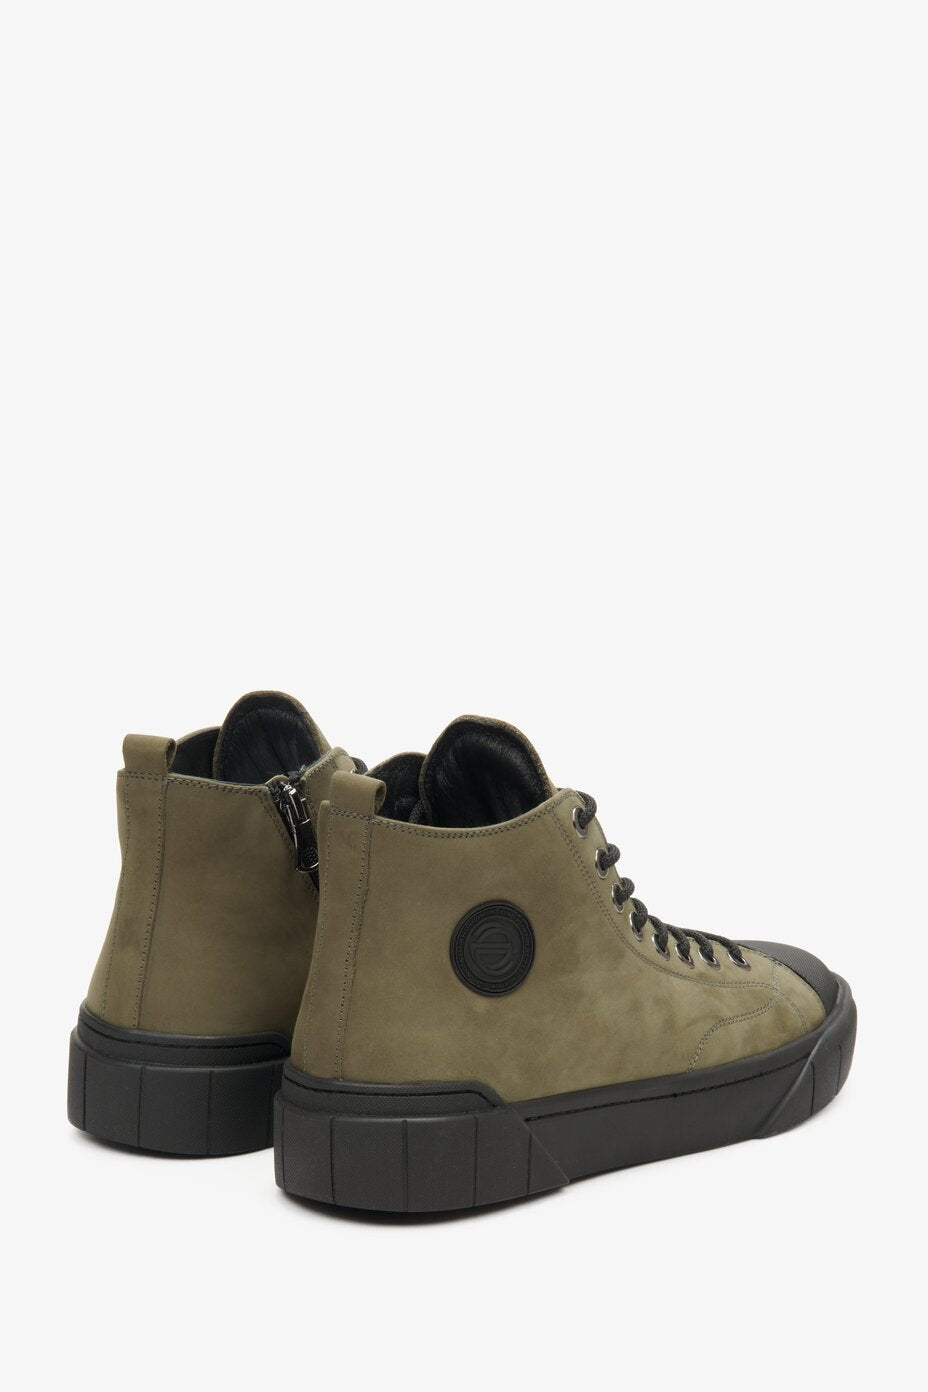 High-top green men's lace-up sneakers by Estro.